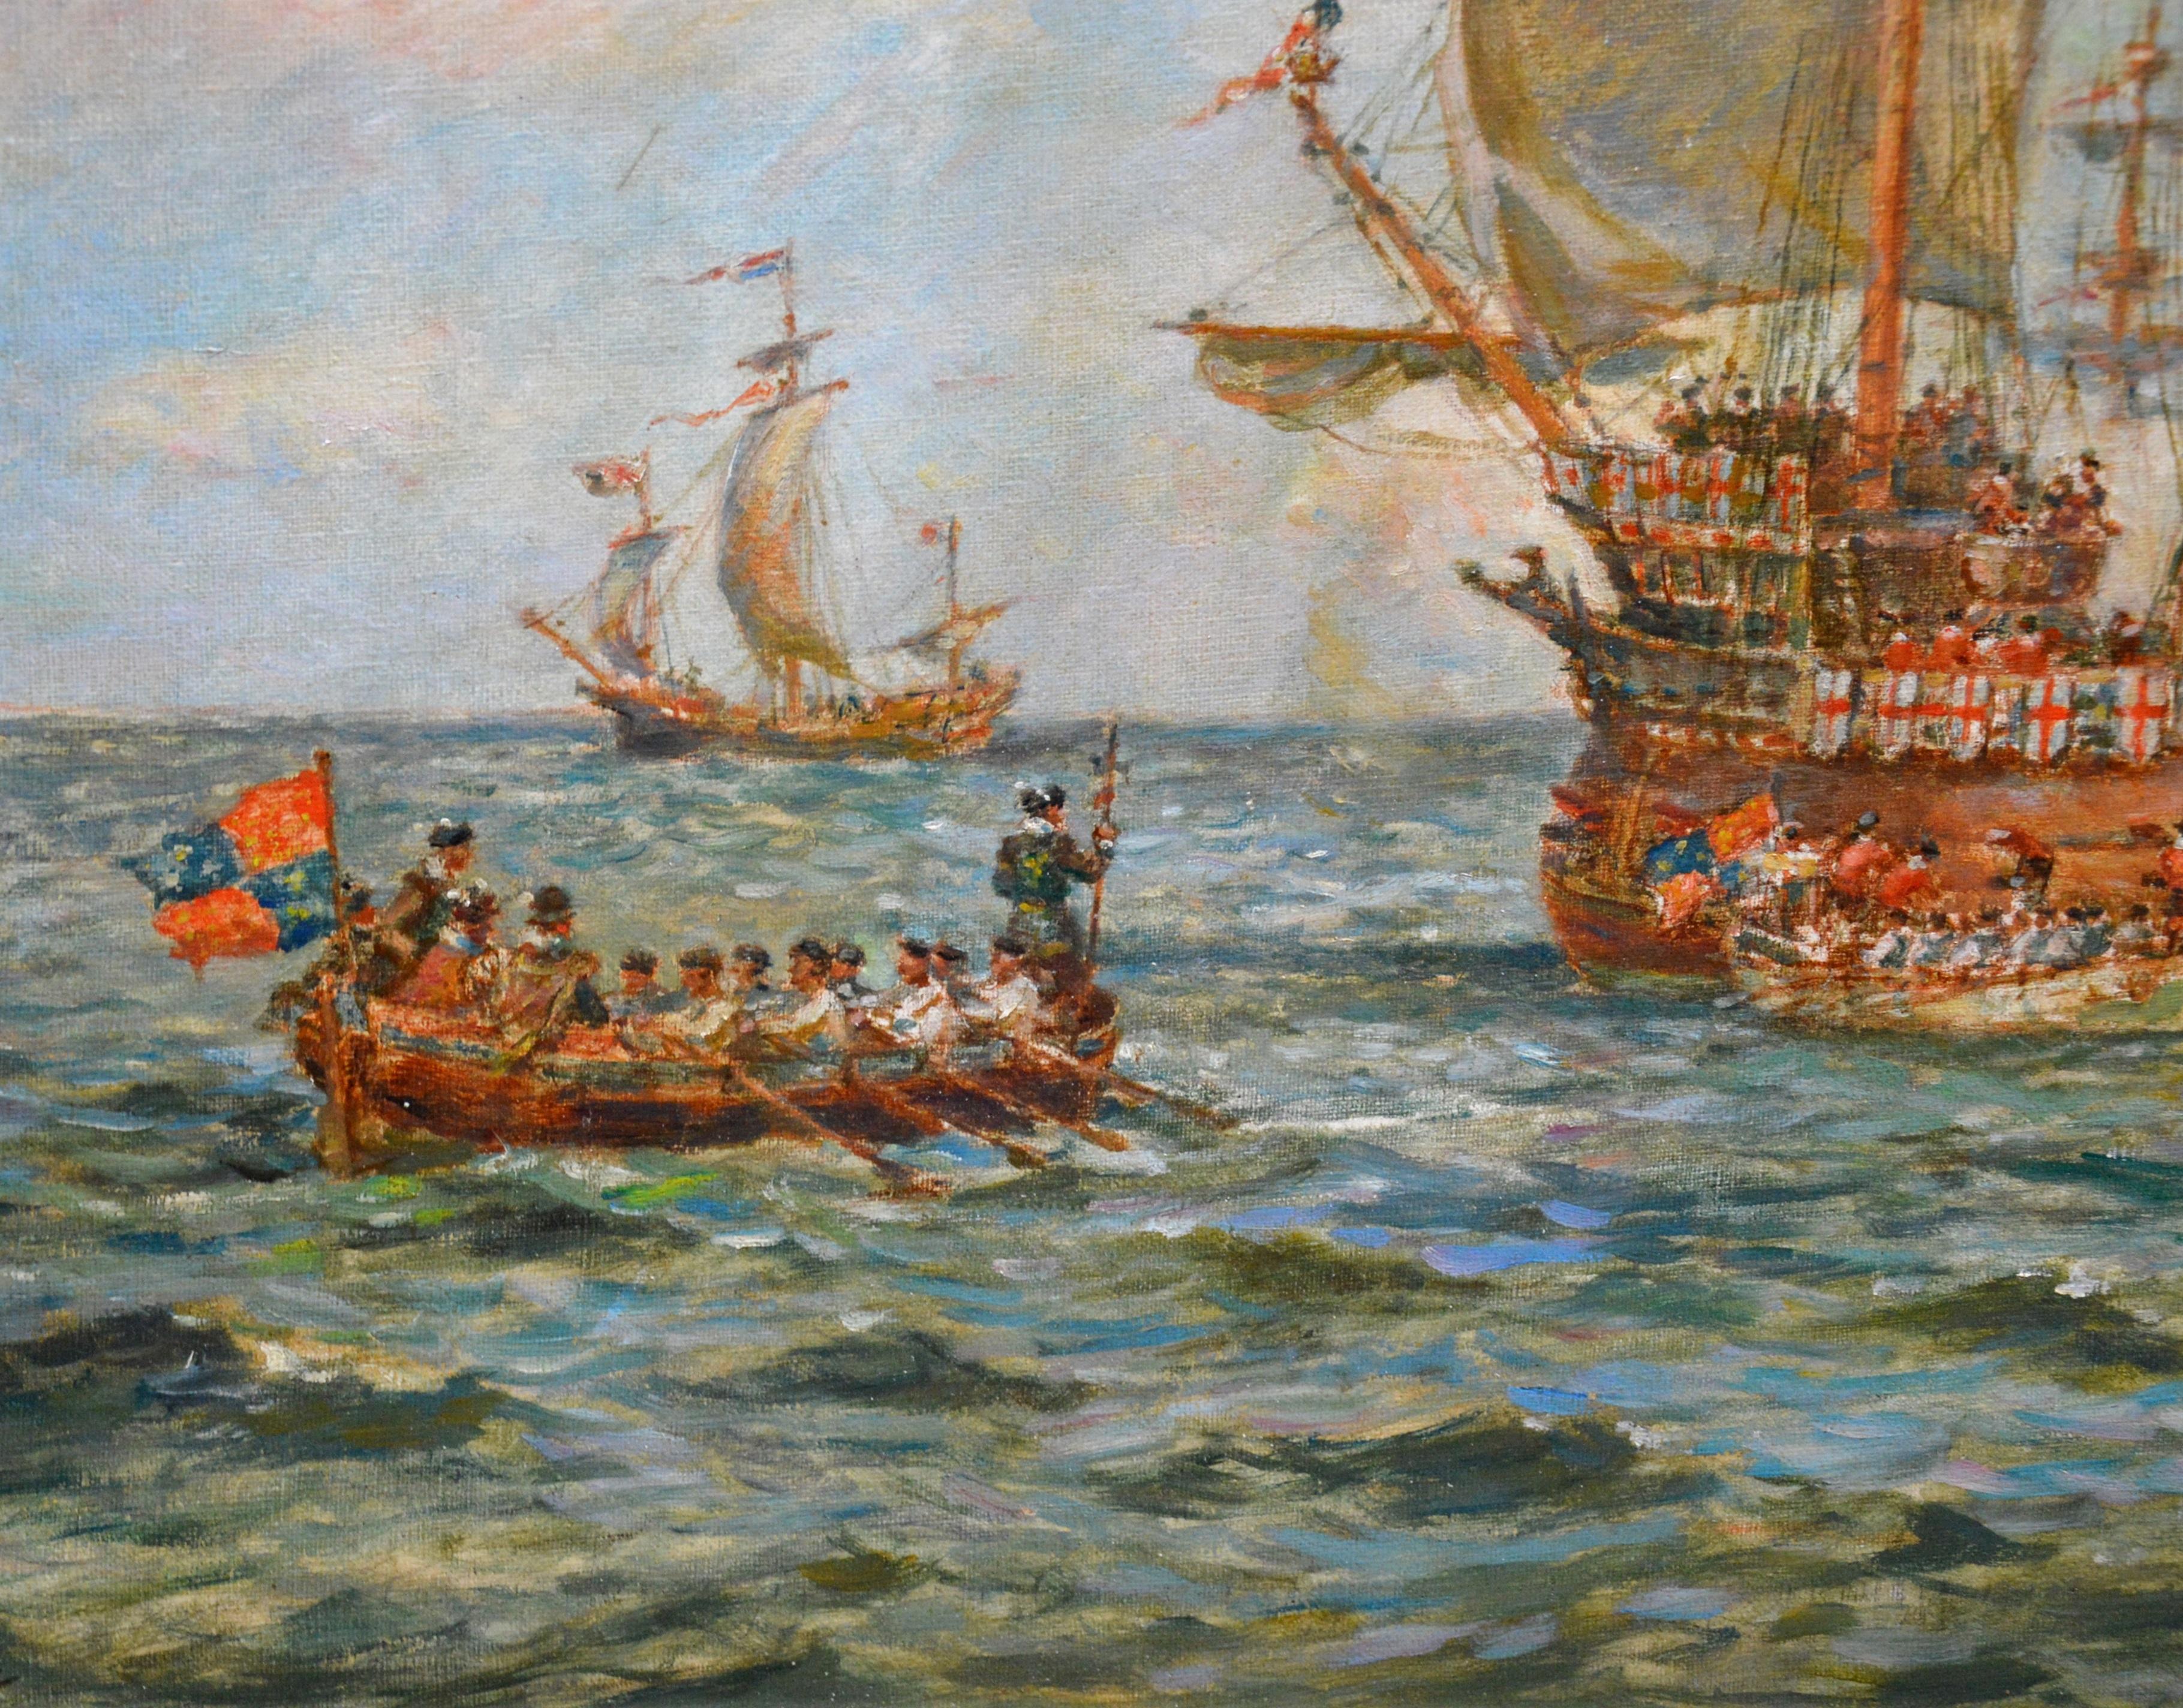 This is a very large fine early 1900s oil on canvas depicting the ‘Embarkation of Henry VIII’ from Dover onboard his flagship Henry Grace à Dieu on his voyage to the Field of the Cloth of Gold in 1520 by the eminent British maritime artist Bernard